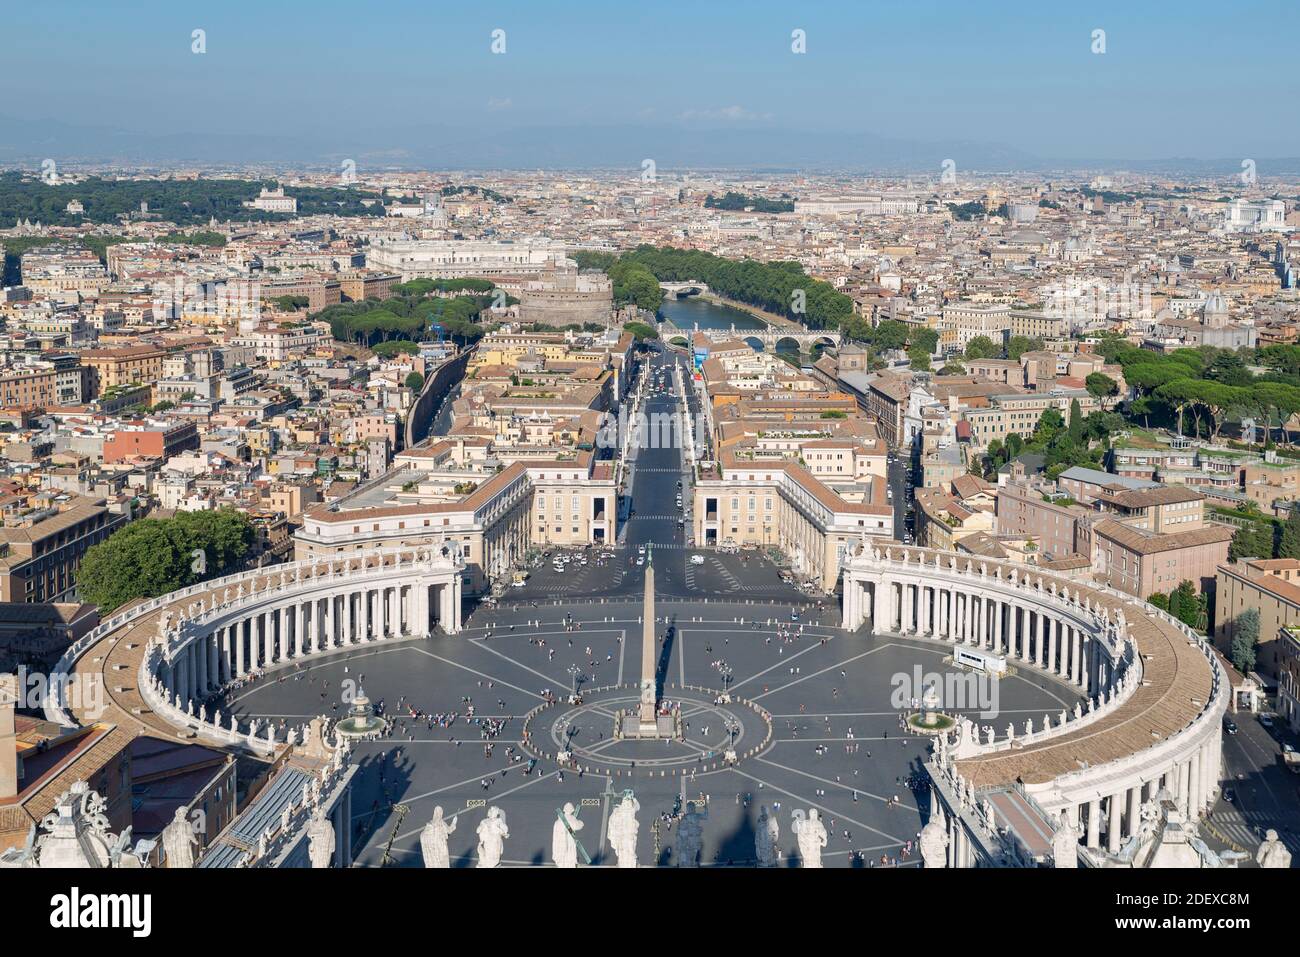 Saint Peter's Square in Vatican City, Rome Skyline of the city. Stock Photo